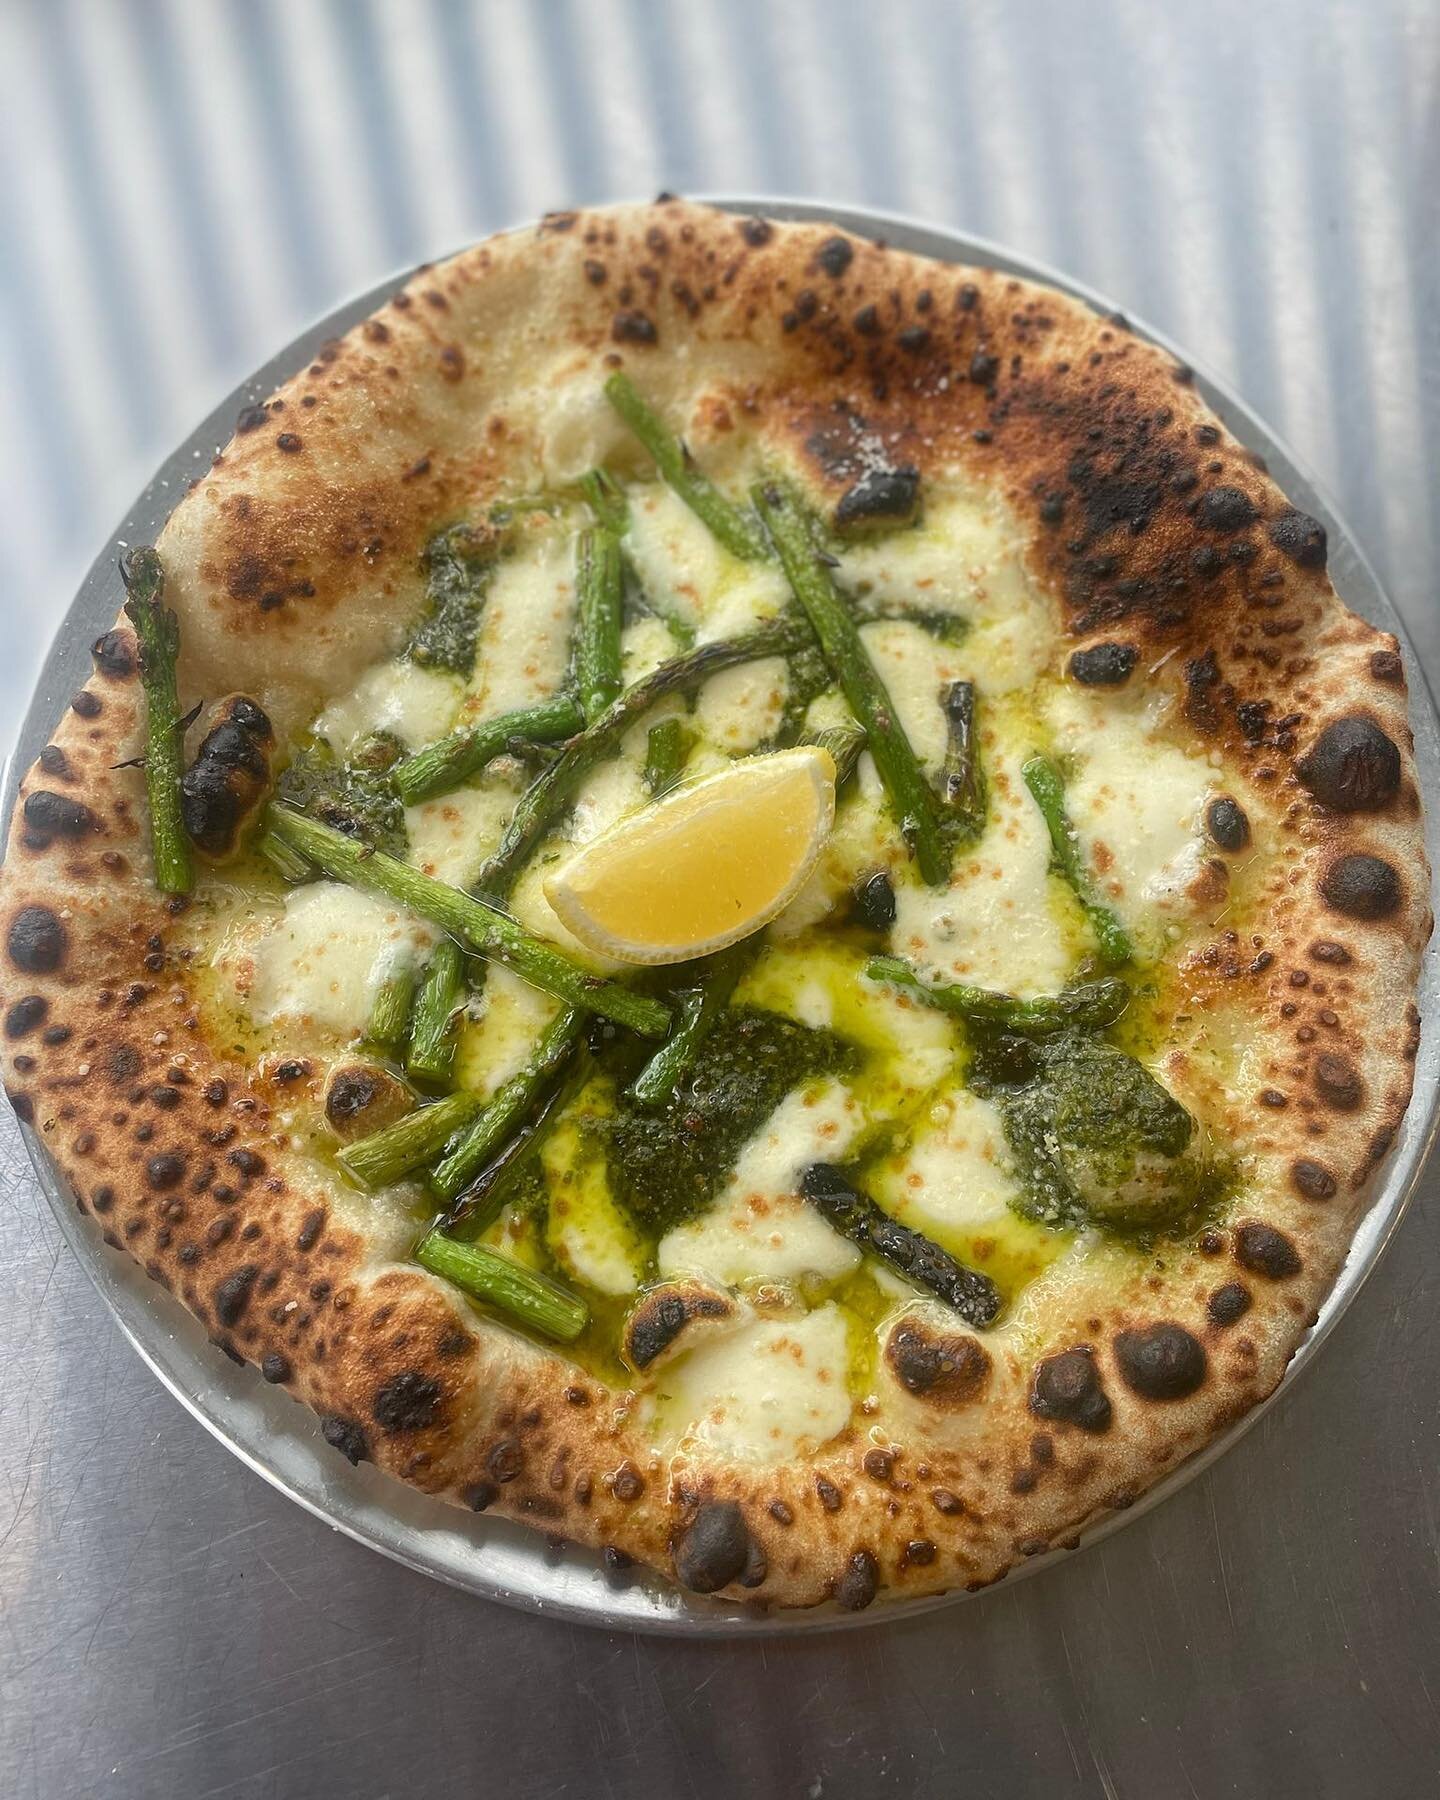 Tis the season for fresh GREENS 🥒🌱🌳

We&rsquo;re a bit late on posting this one, but better late than never hey! This spring pie is reeeeally springing, so come down and try it before the Summer hits 🔥☀️

SPRING PIE 🌿🍋

🍕ROAST ASPARAGUS
🍕FRES